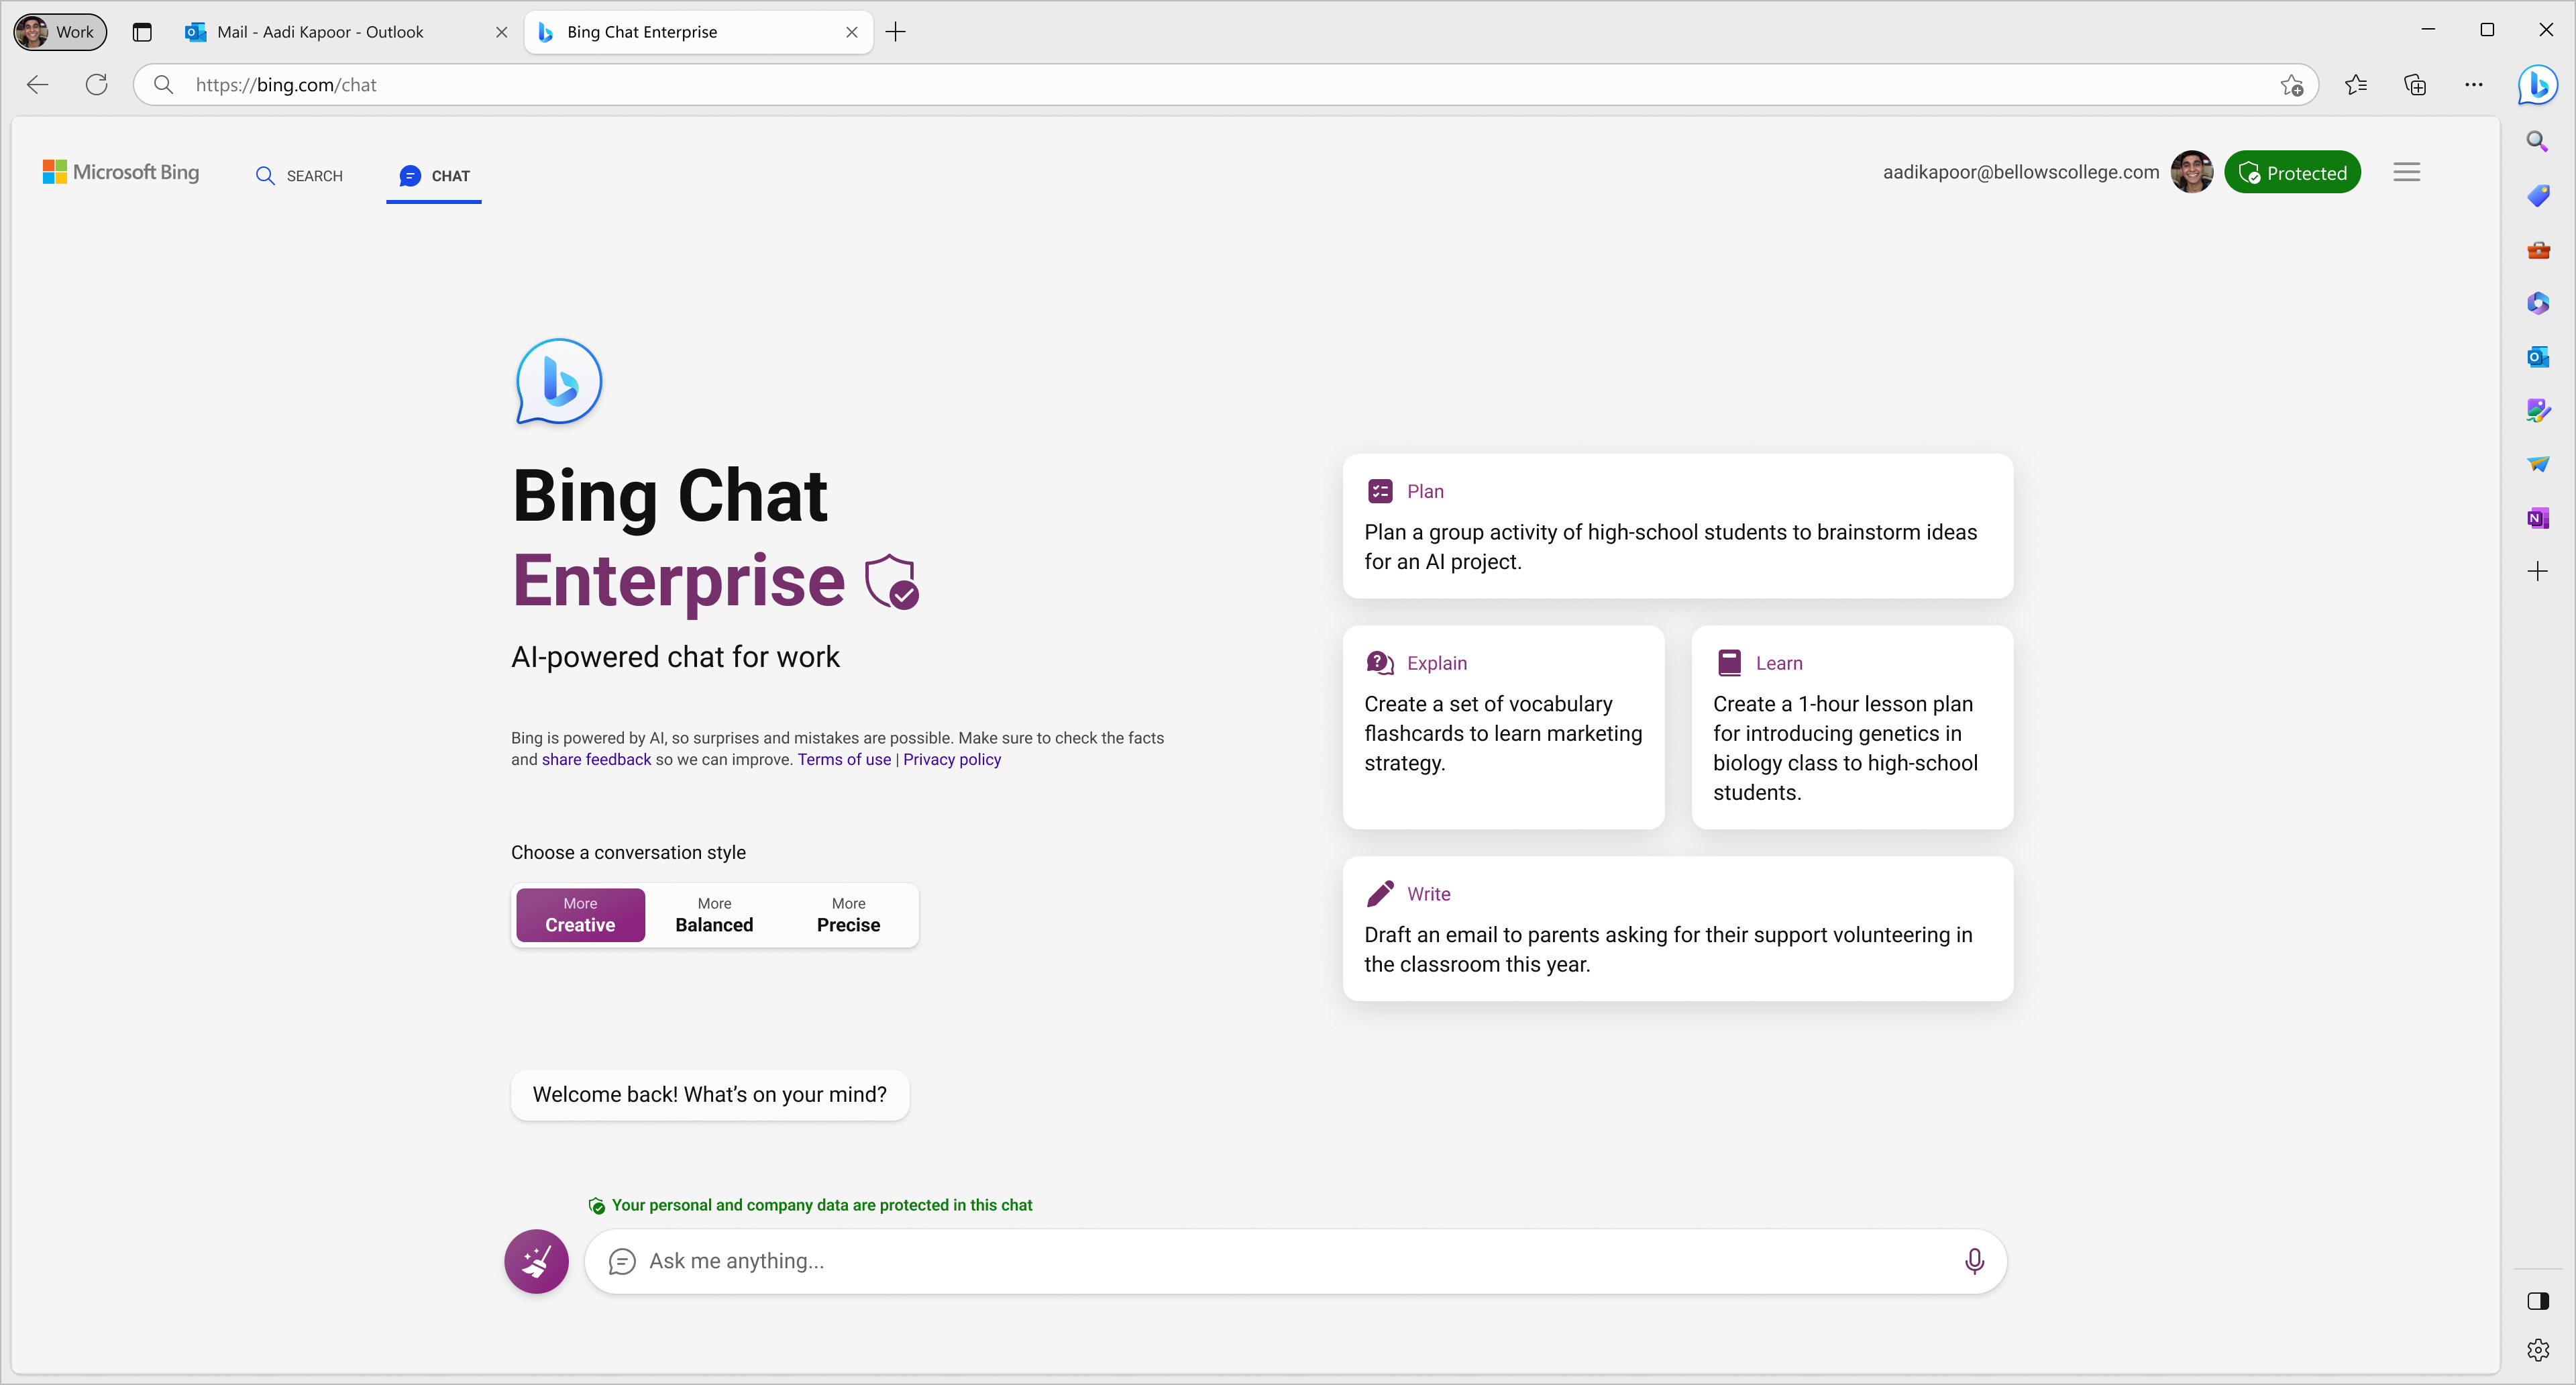 bing-chat-enterprise-is-in-preview-for-microsoft-365-a3-and-a5-licenses-for-faculty-users